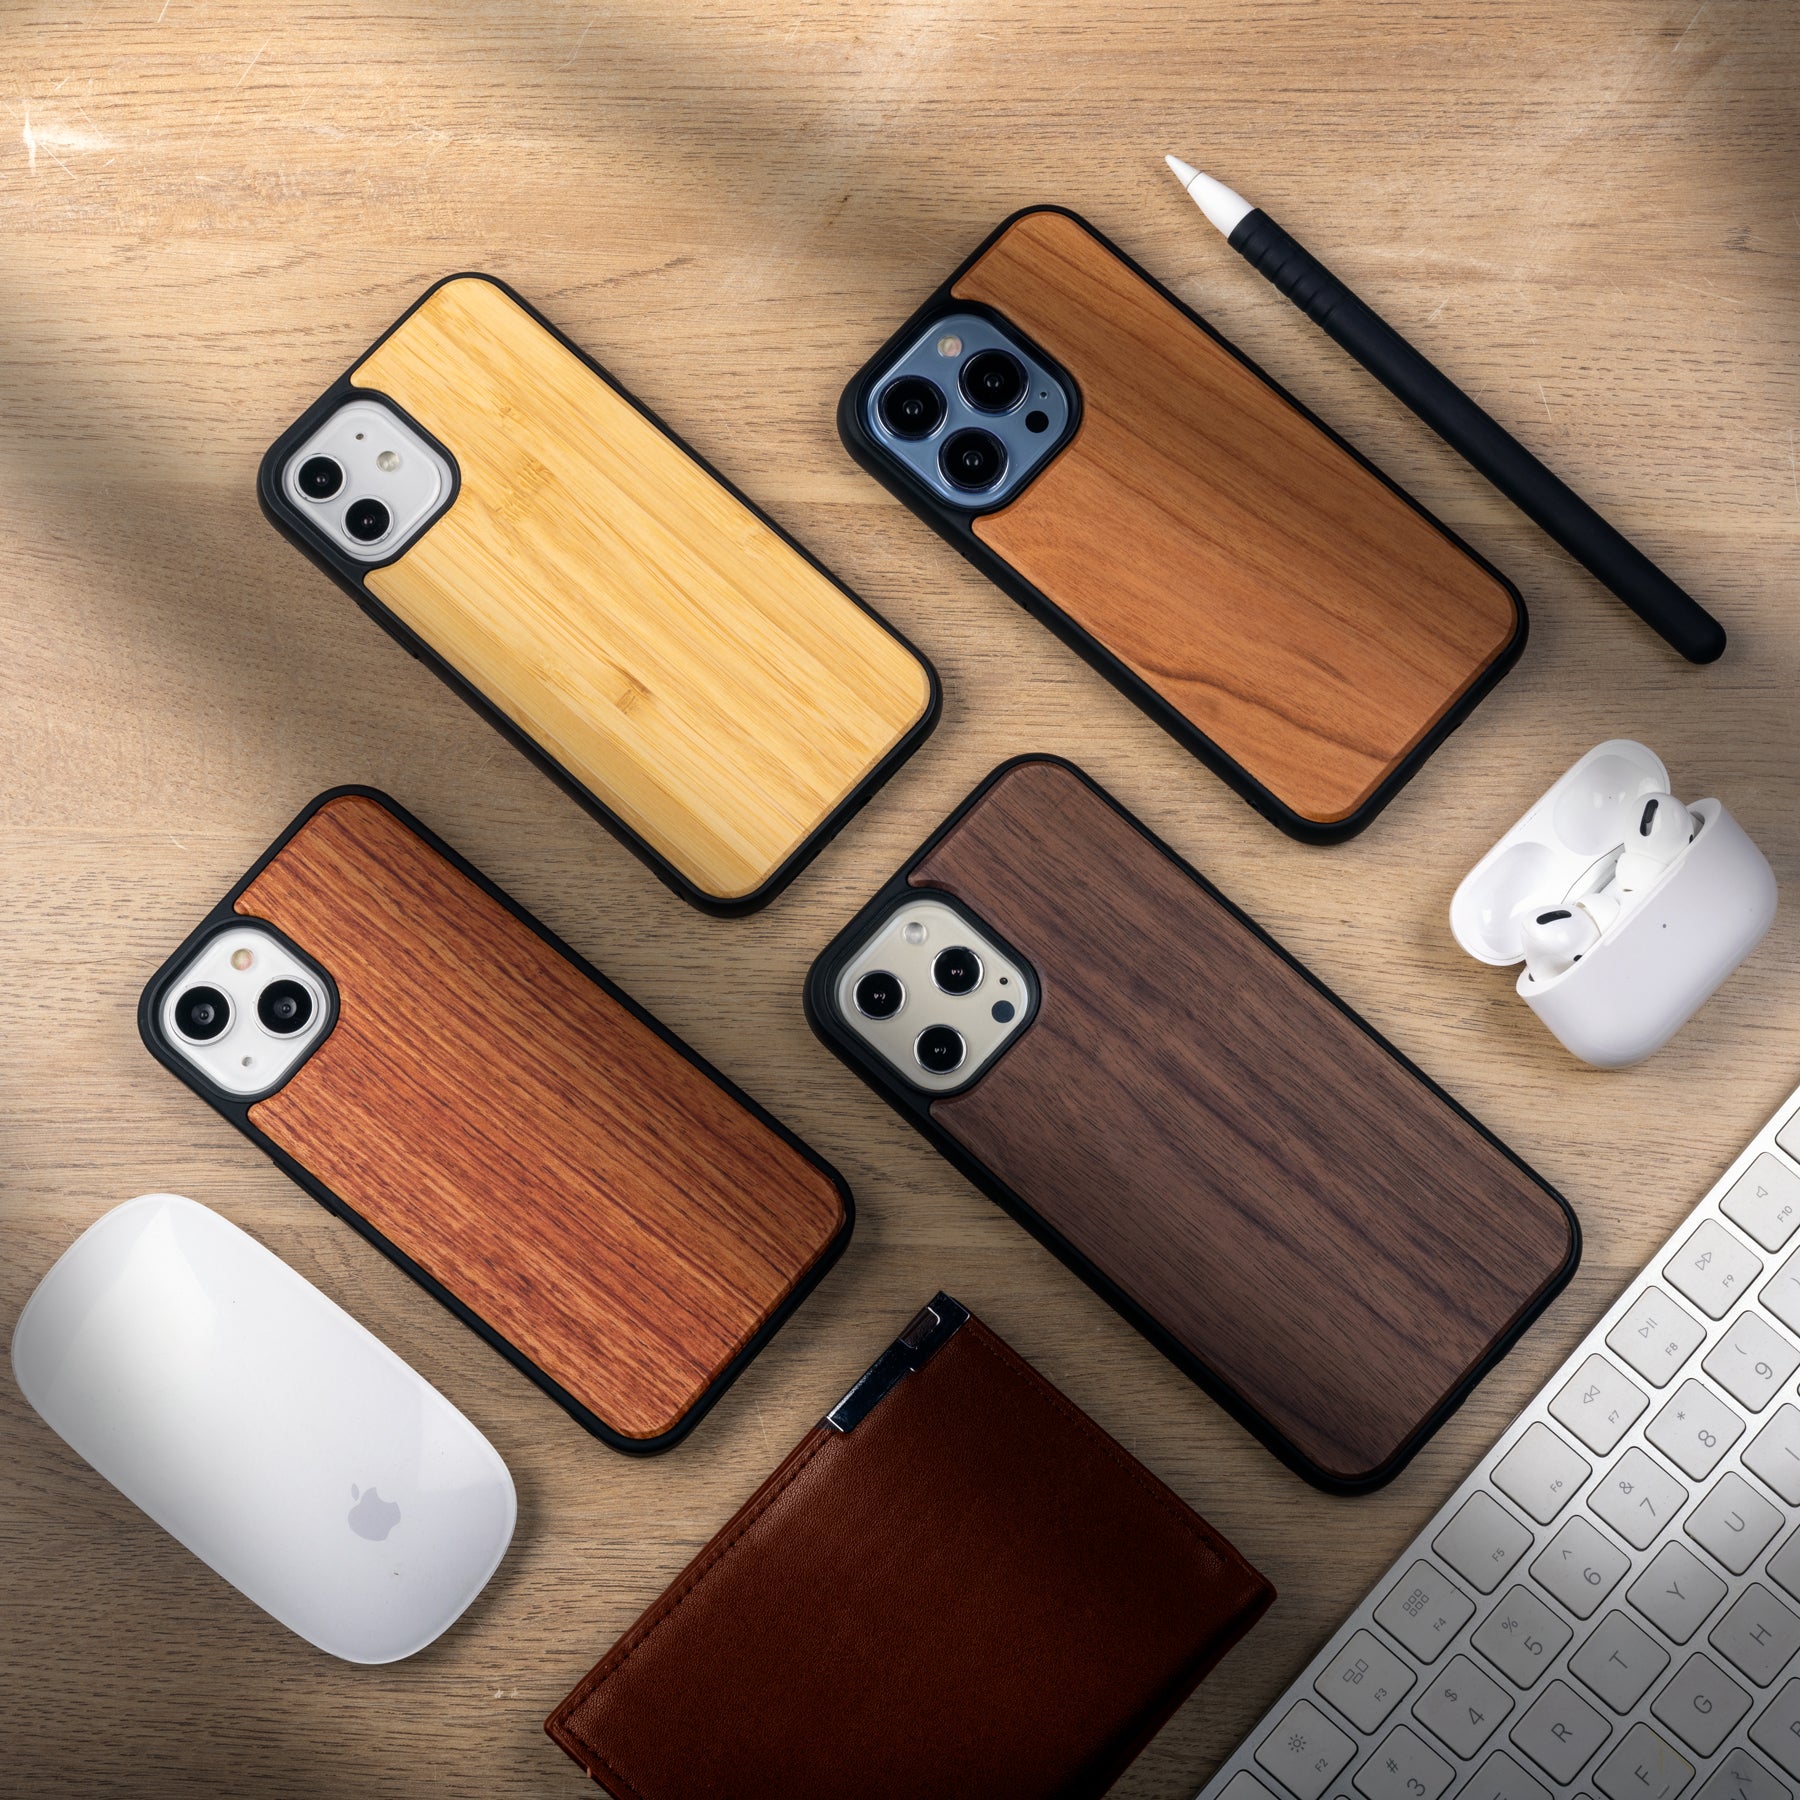 Wooden iPhone Case